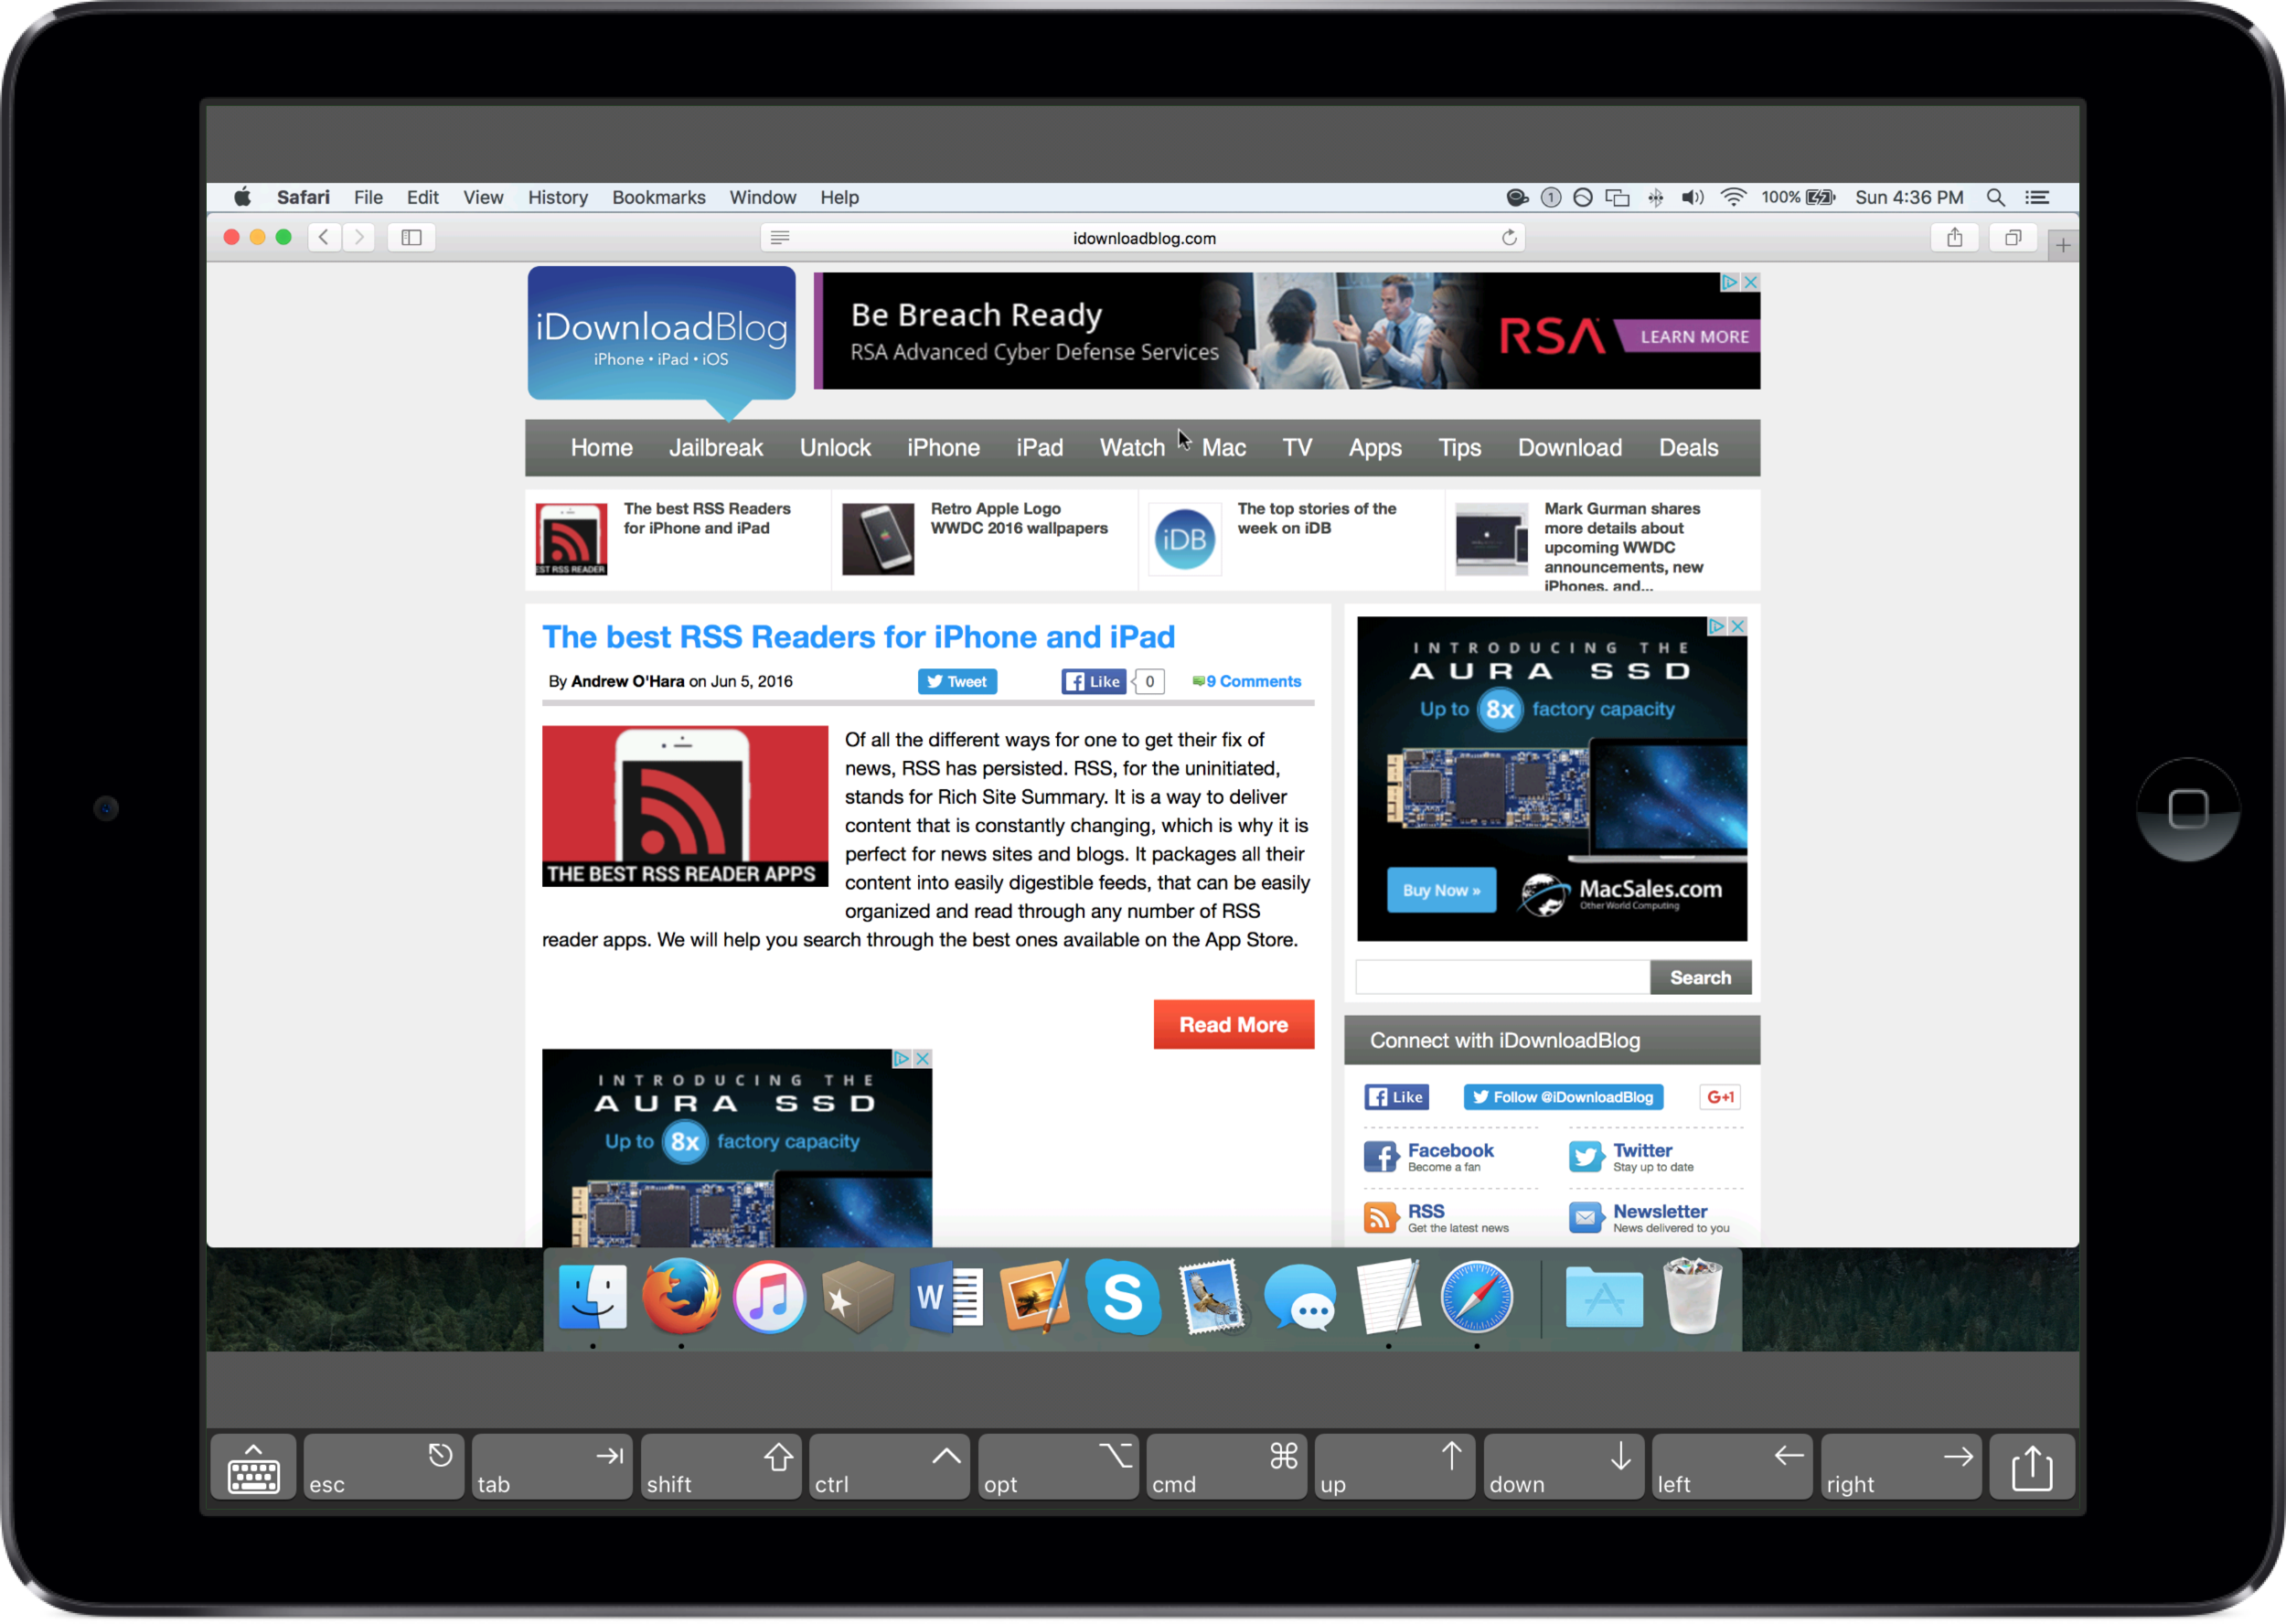 Control Mac from iPhone or iPad with Screens VNC